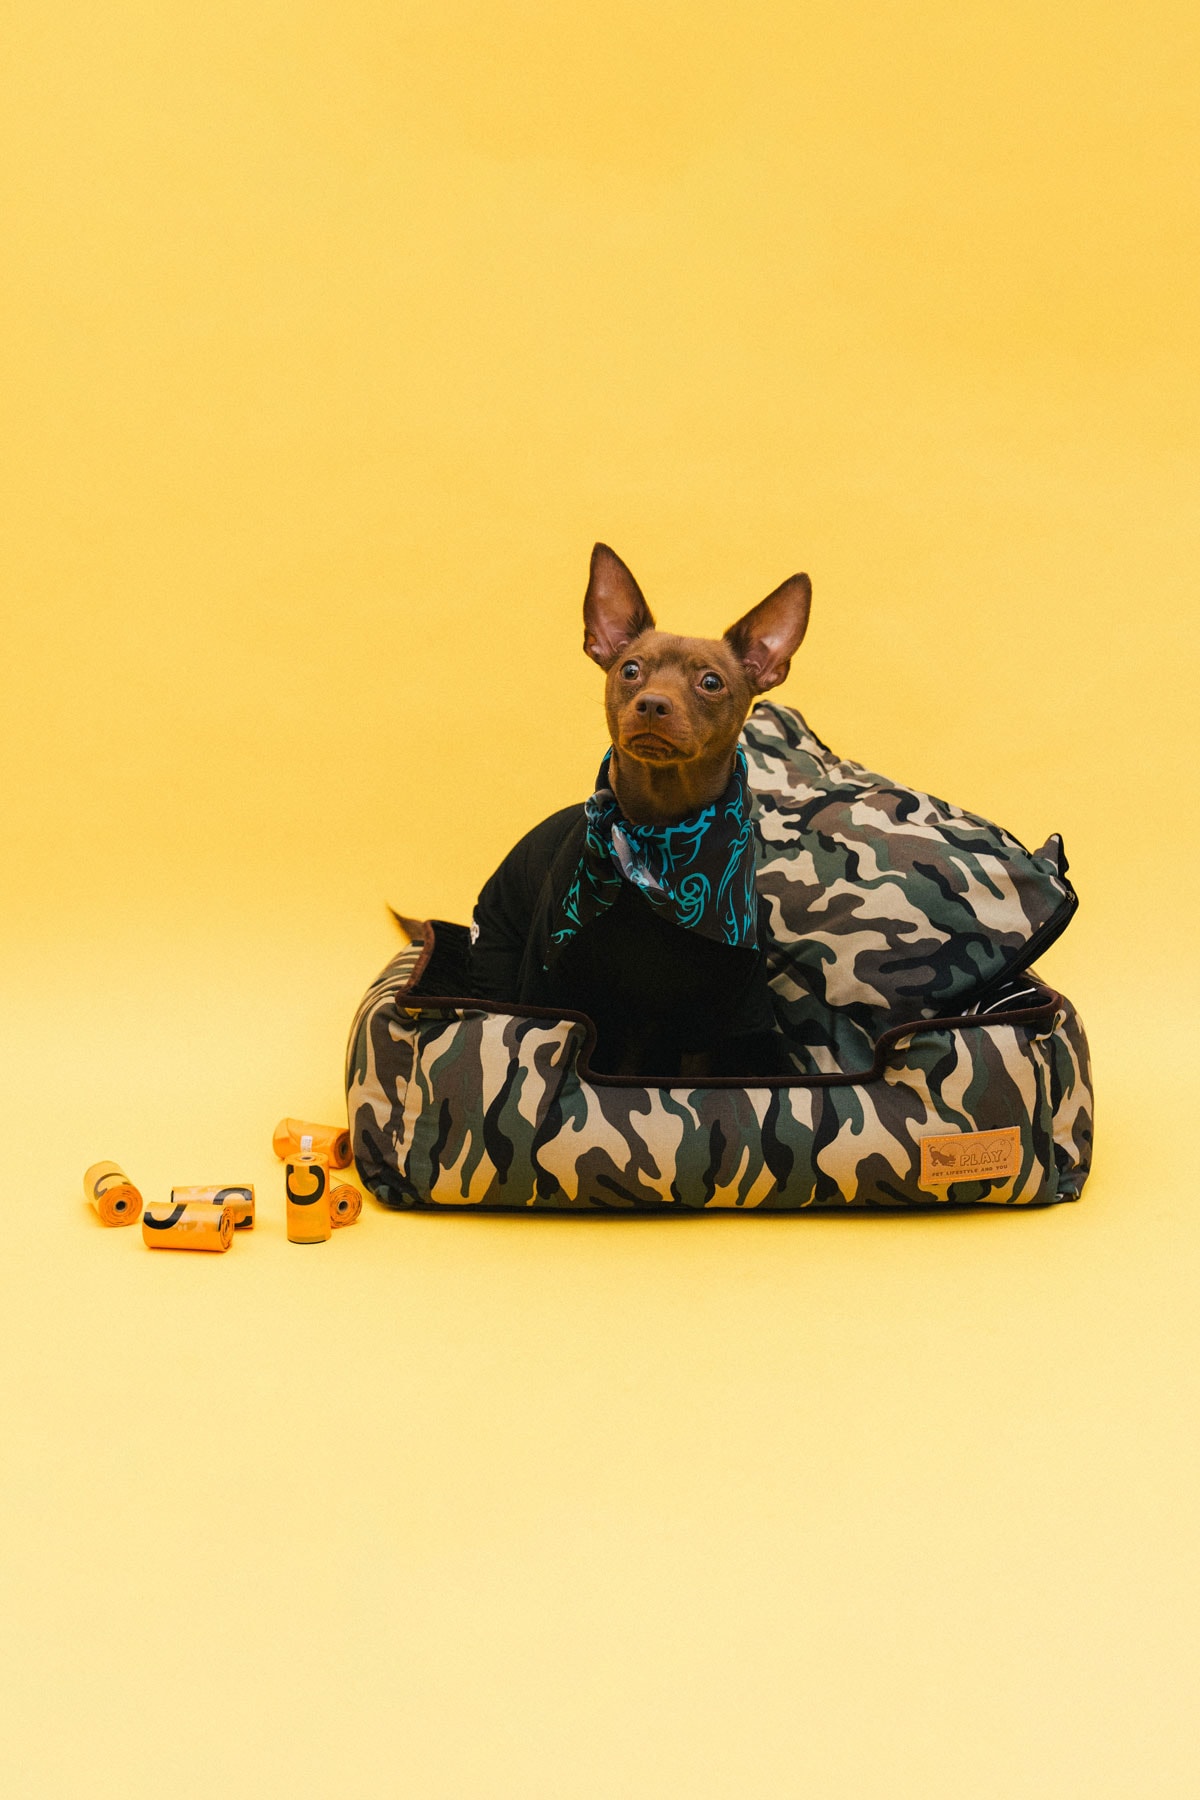 The 10 Best Dog Clothing and Accessory Brands